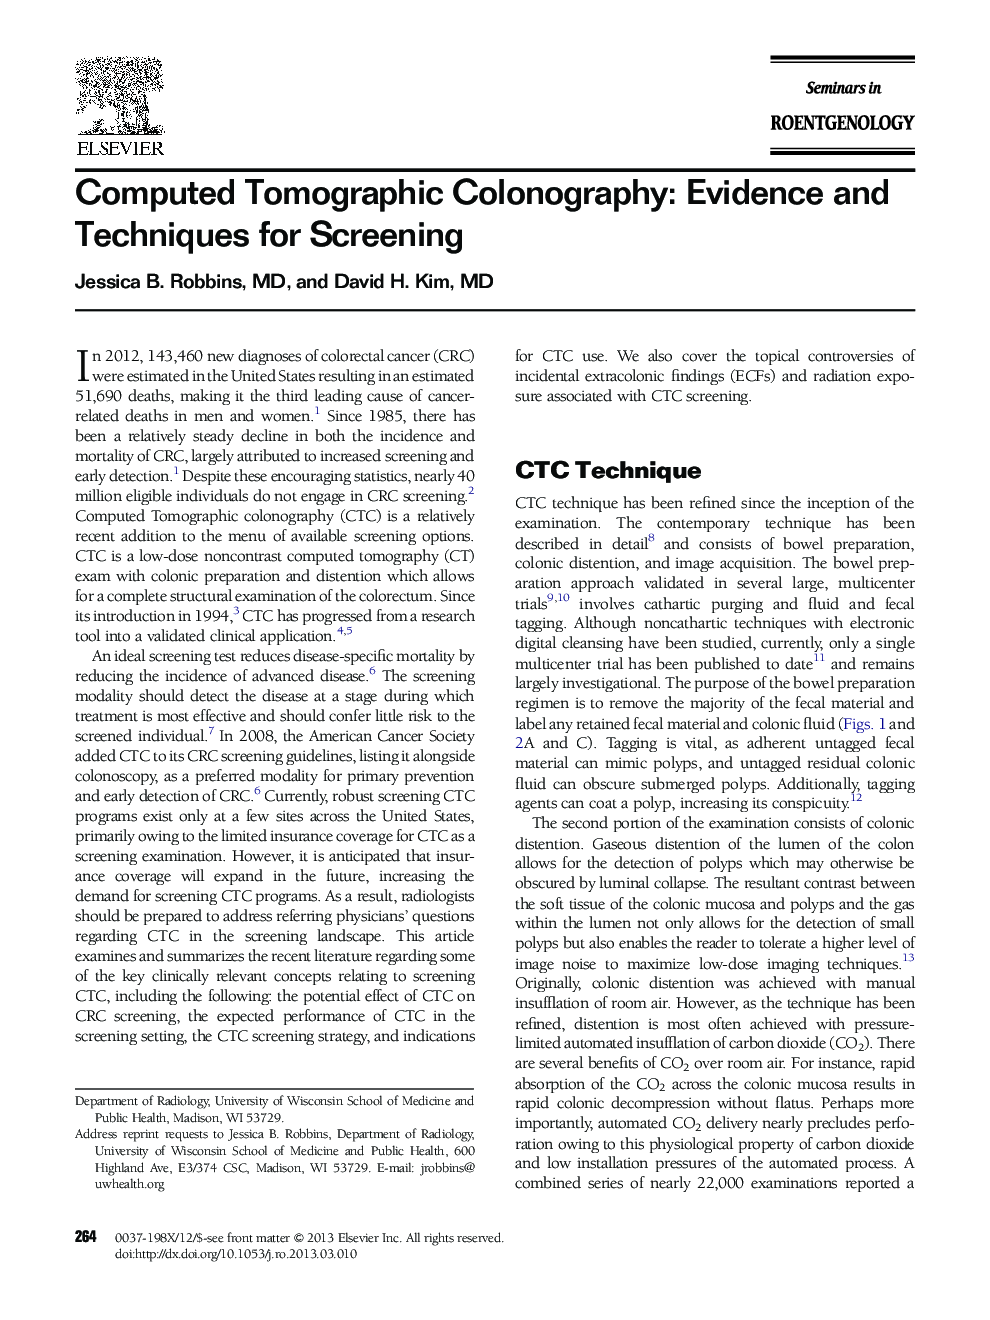 Computed Tomographic Colonography: Evidence and Techniques for Screening